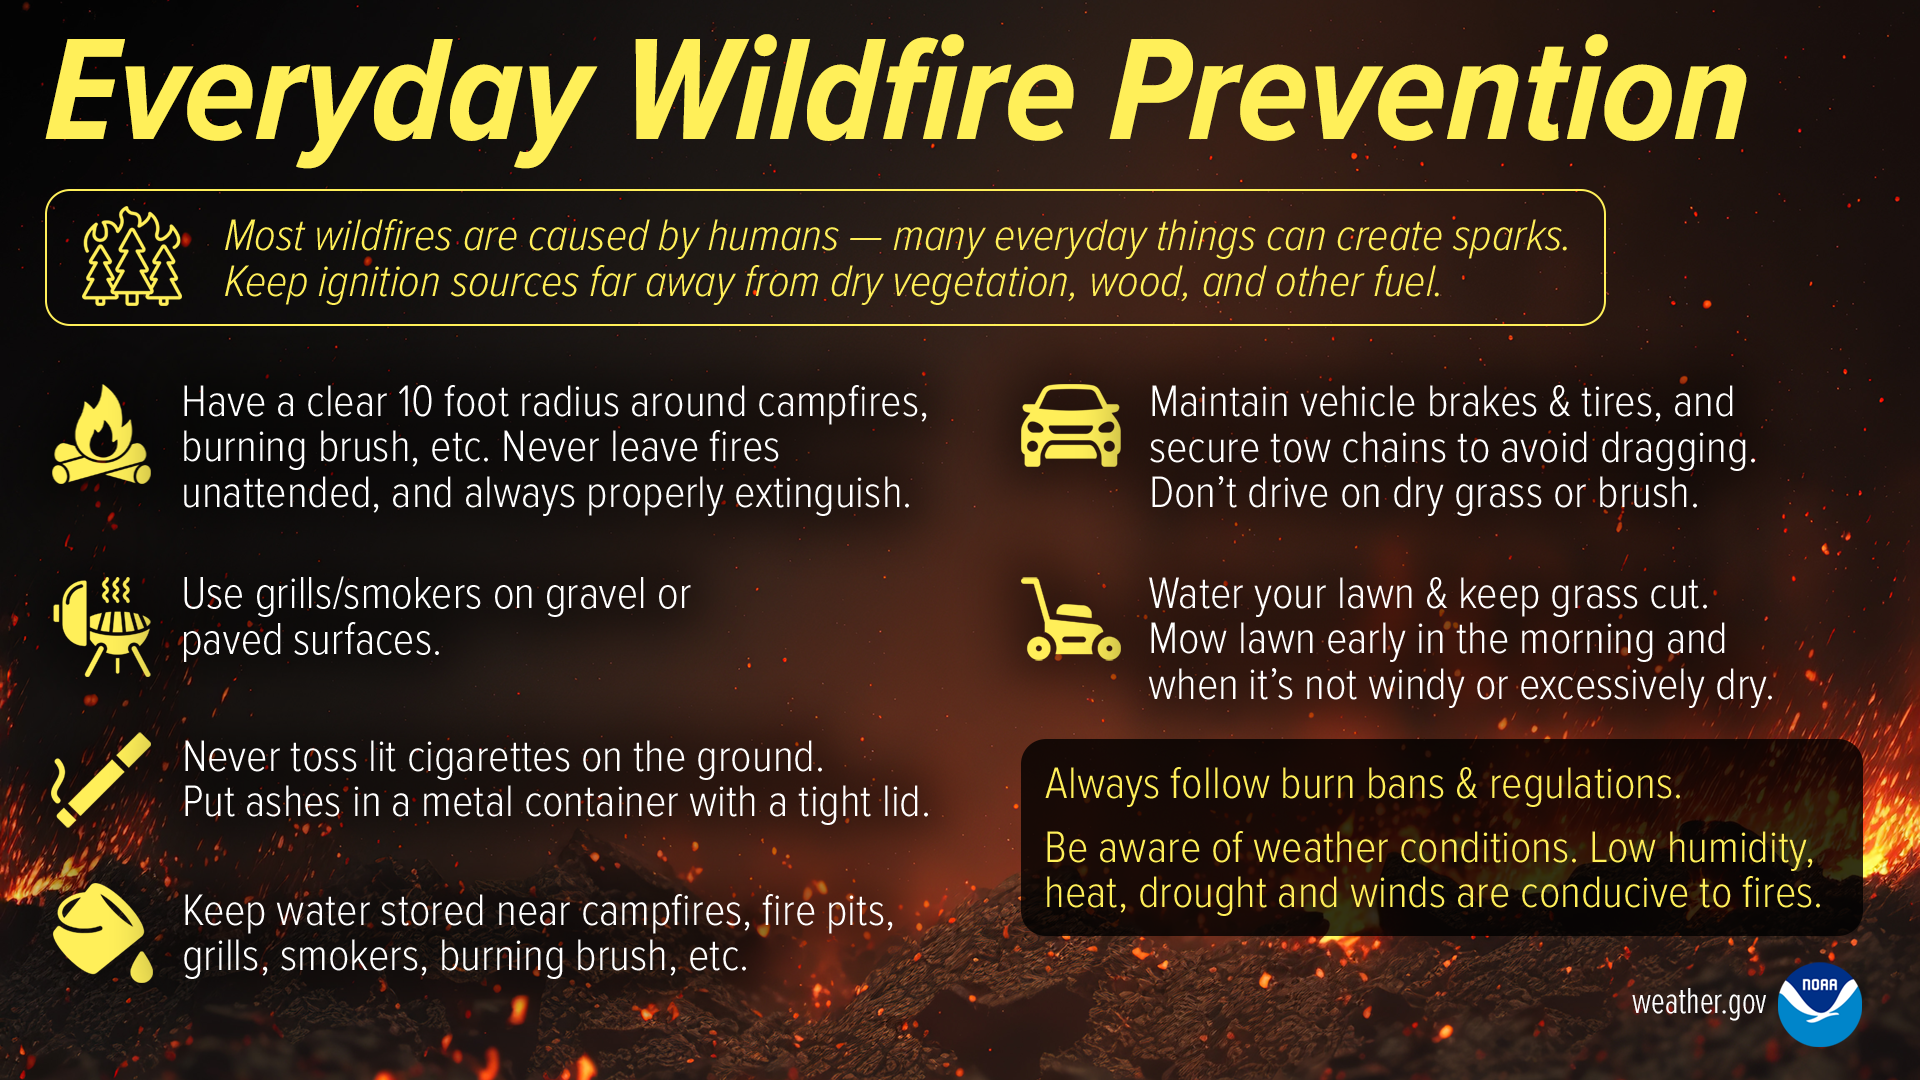 Everyday Wildfire Prevention. Most wildfires are caused by humans - many everyday things can create sparks. Keep ignition sources far away from dry vegetation, wood, and other fuel. Have a clear 10 foot radius around campfires, burning brush, etc. Never leave fires unattended, and always properly extinguish. Use grills and smokers on gravel or paved surfaces. Never toss lit cigarettes on the ground. Put ashes in a metal container with a tight lid. Keep water stroed near campfires, fire pits, grills, smokers, burning brush, etc. Maintain vehicle brakes & tires, and secure tow chains to avoid dragging. Don't drive on dry grass or brush. Water your lawn and keep grass cut. Mow lawn early in the morning and when it's not windy or excessively dry. Always follow burn bans and regulations. Be aware of weather conditions. Low humidity, heat, drought and winds are conducive to fires.